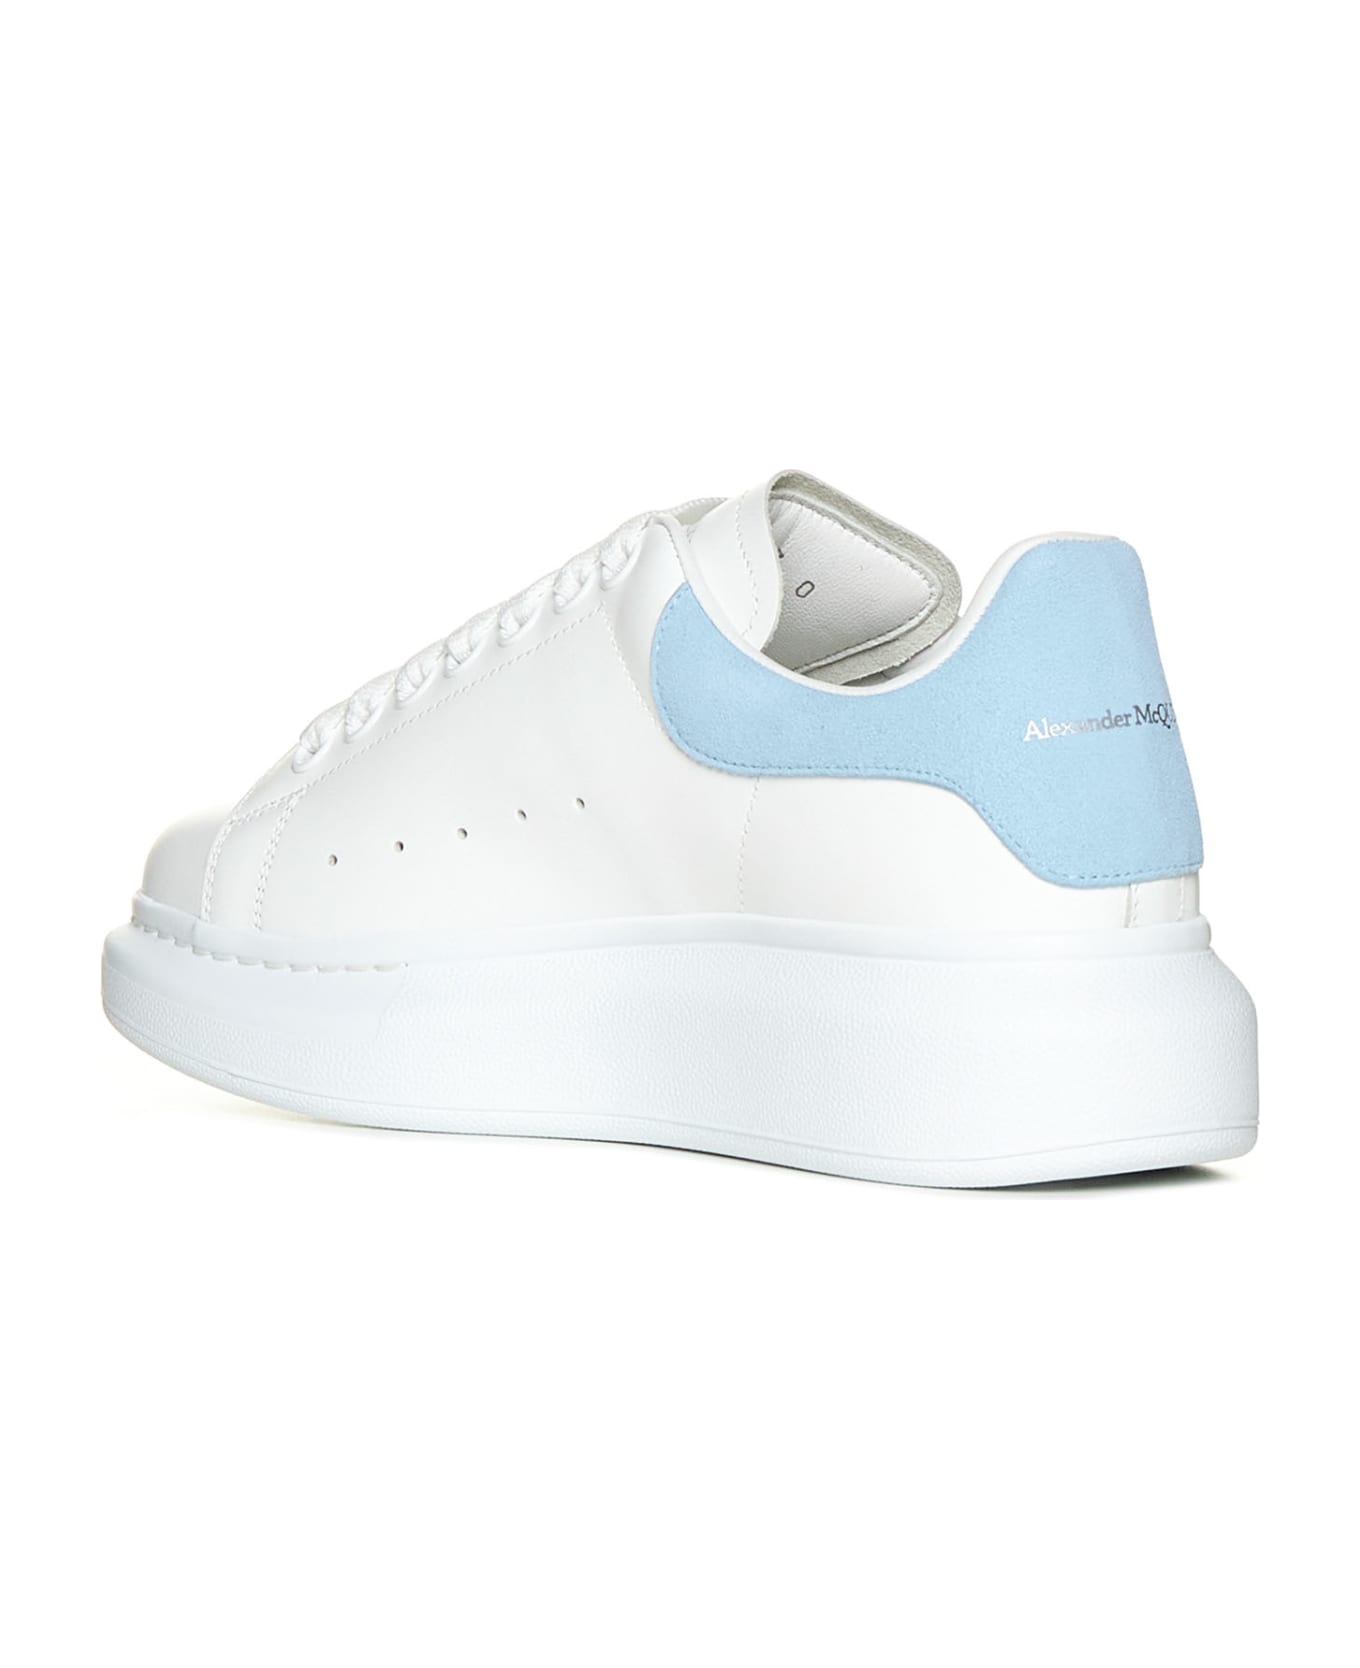 Alexander McQueen Sneakers In Leather And Light Blue Heel - White/powder Blue ウェッジシューズ